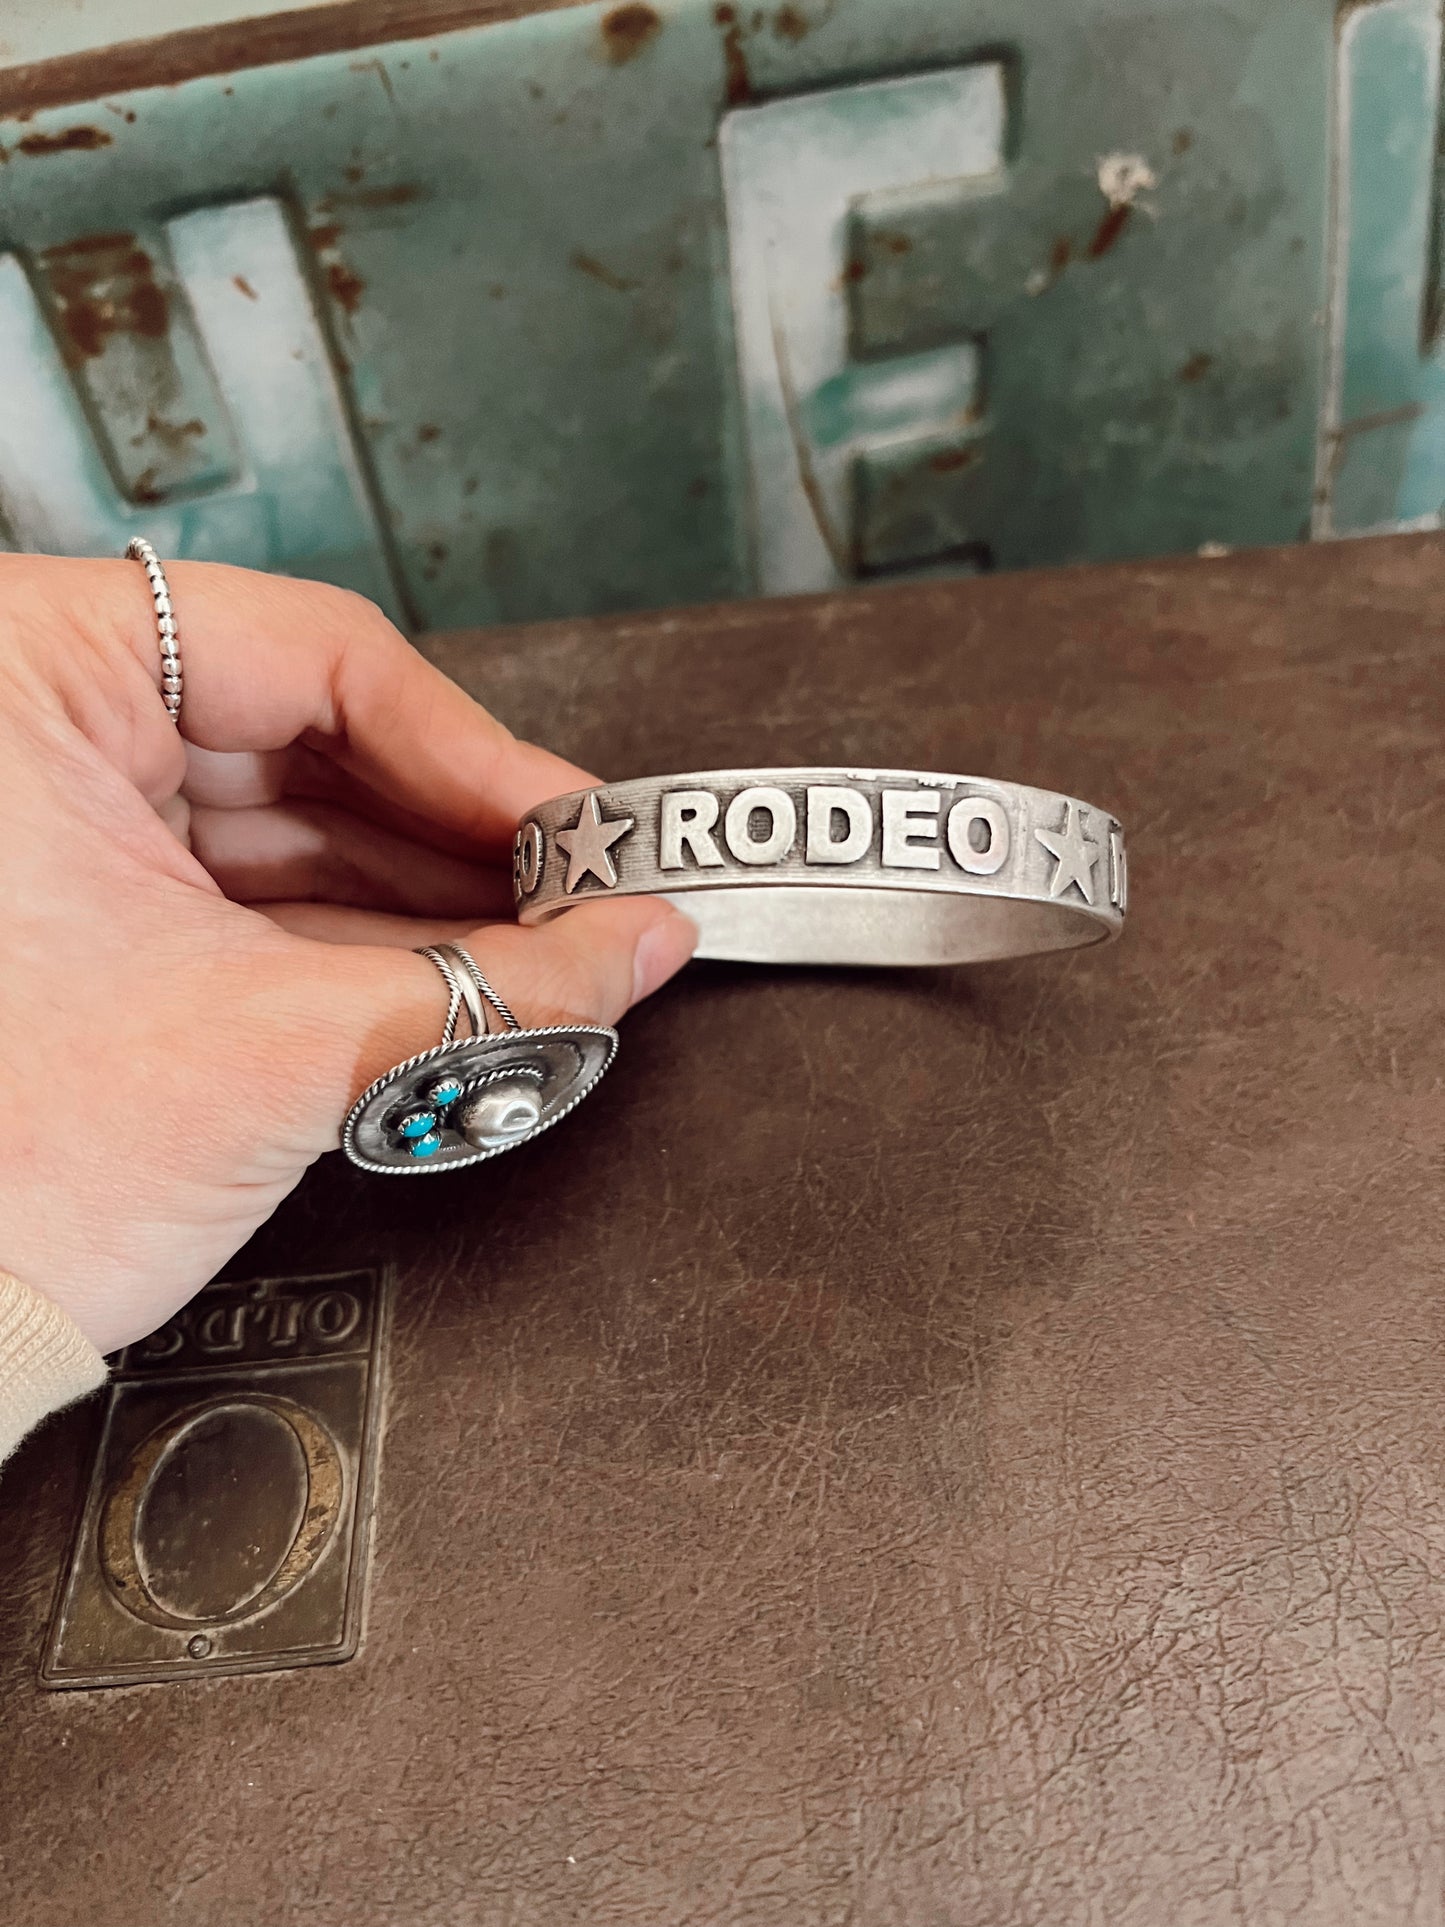 The Rodeo Bangle